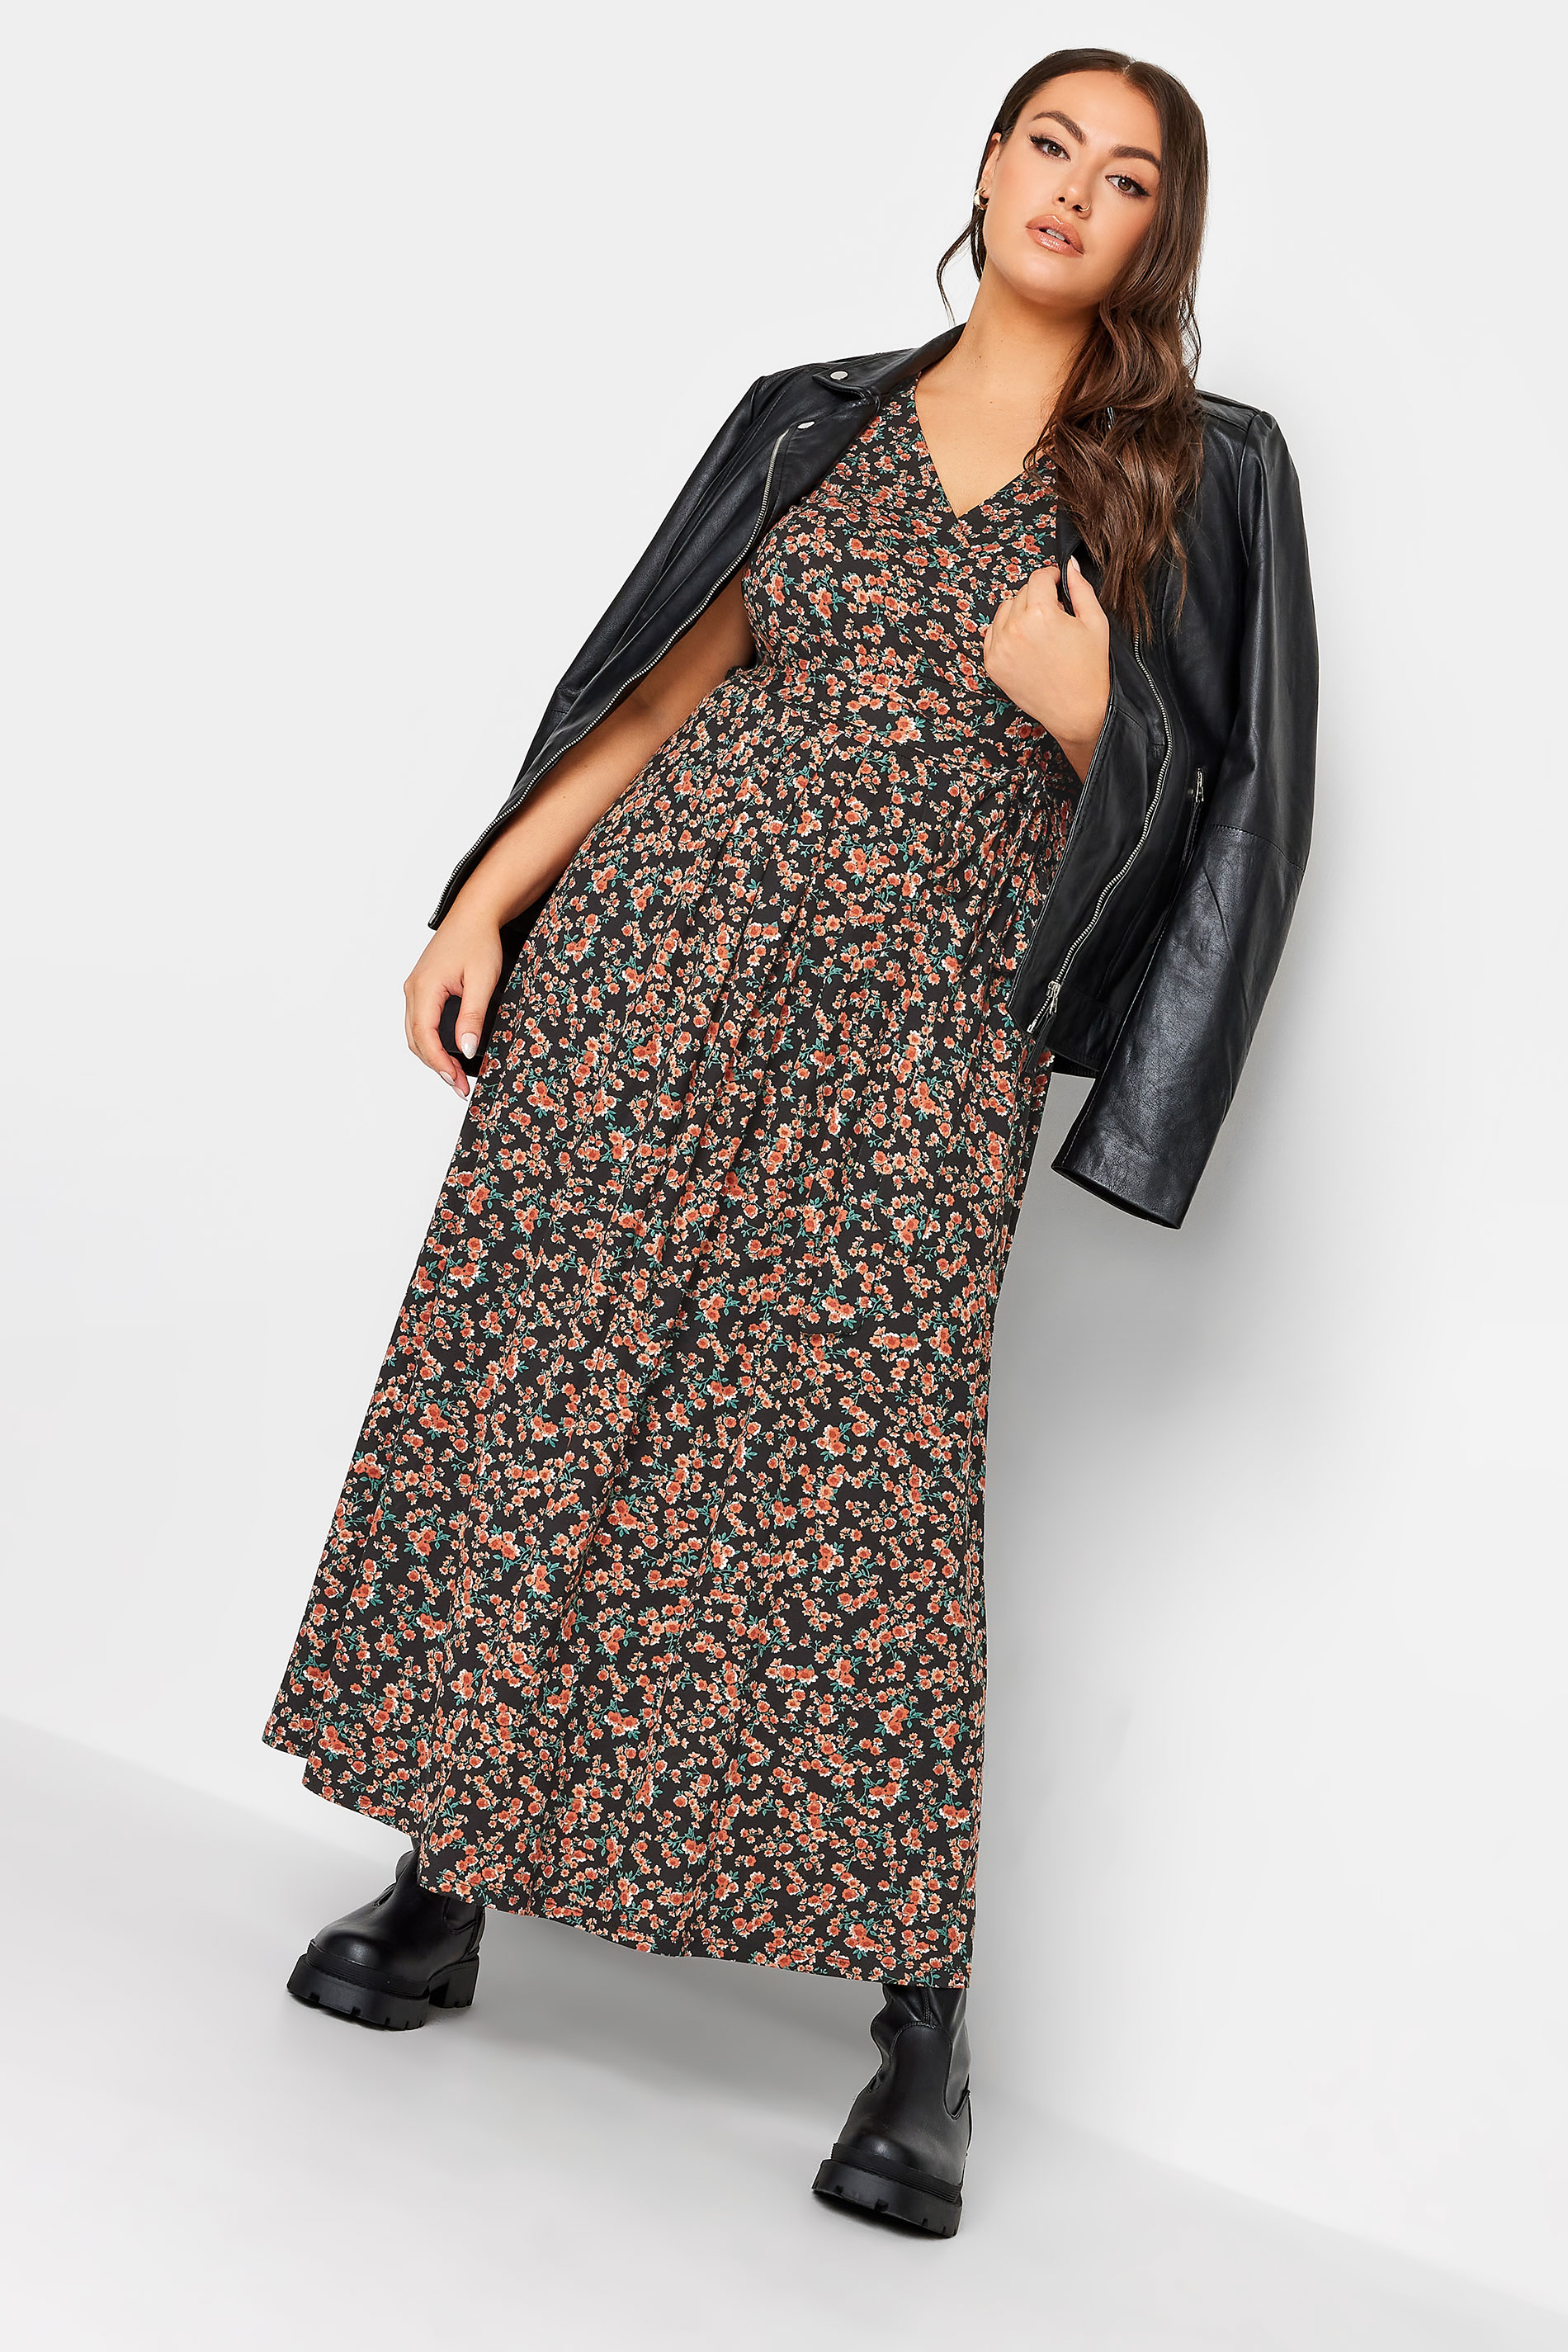 YOURS Plus Size Black Ditsy Floral Print Wrap Maxi Dress | Yours Clothing 3